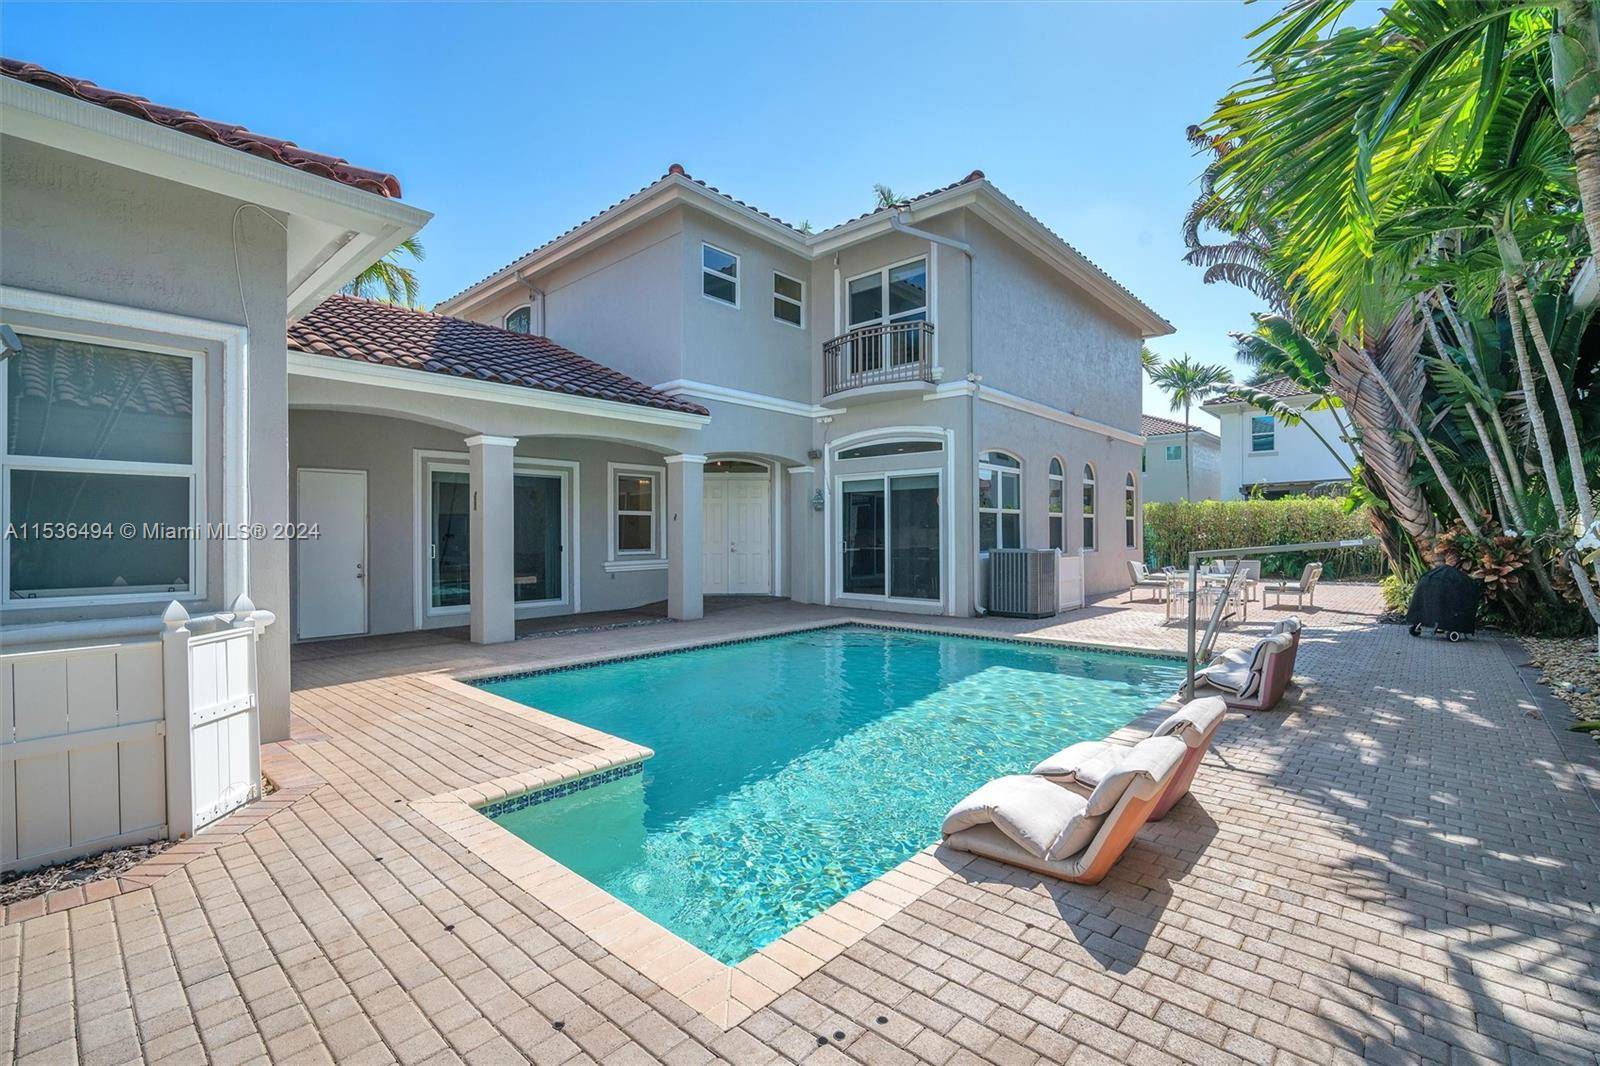 Welcome to a distinguished property offering unparalleled comfort, style, and convenience in the heart of Harbor Islands.